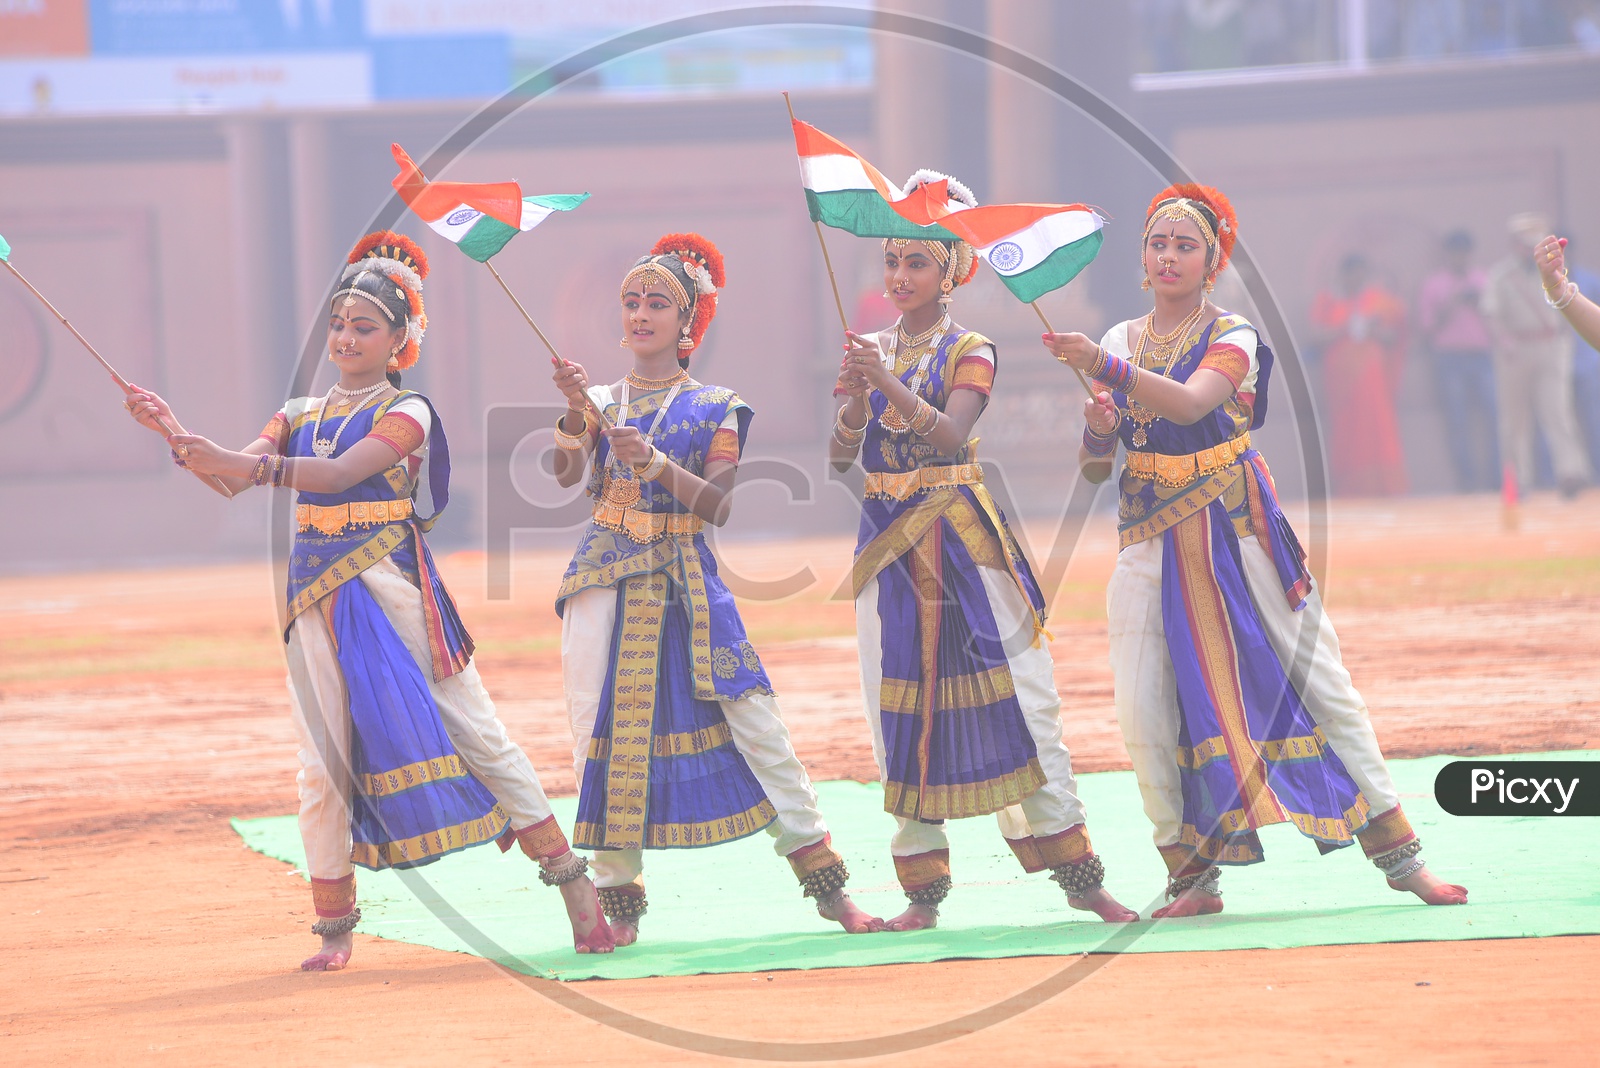 School Students In Classical Dancers Attire Holding Indian National Flags